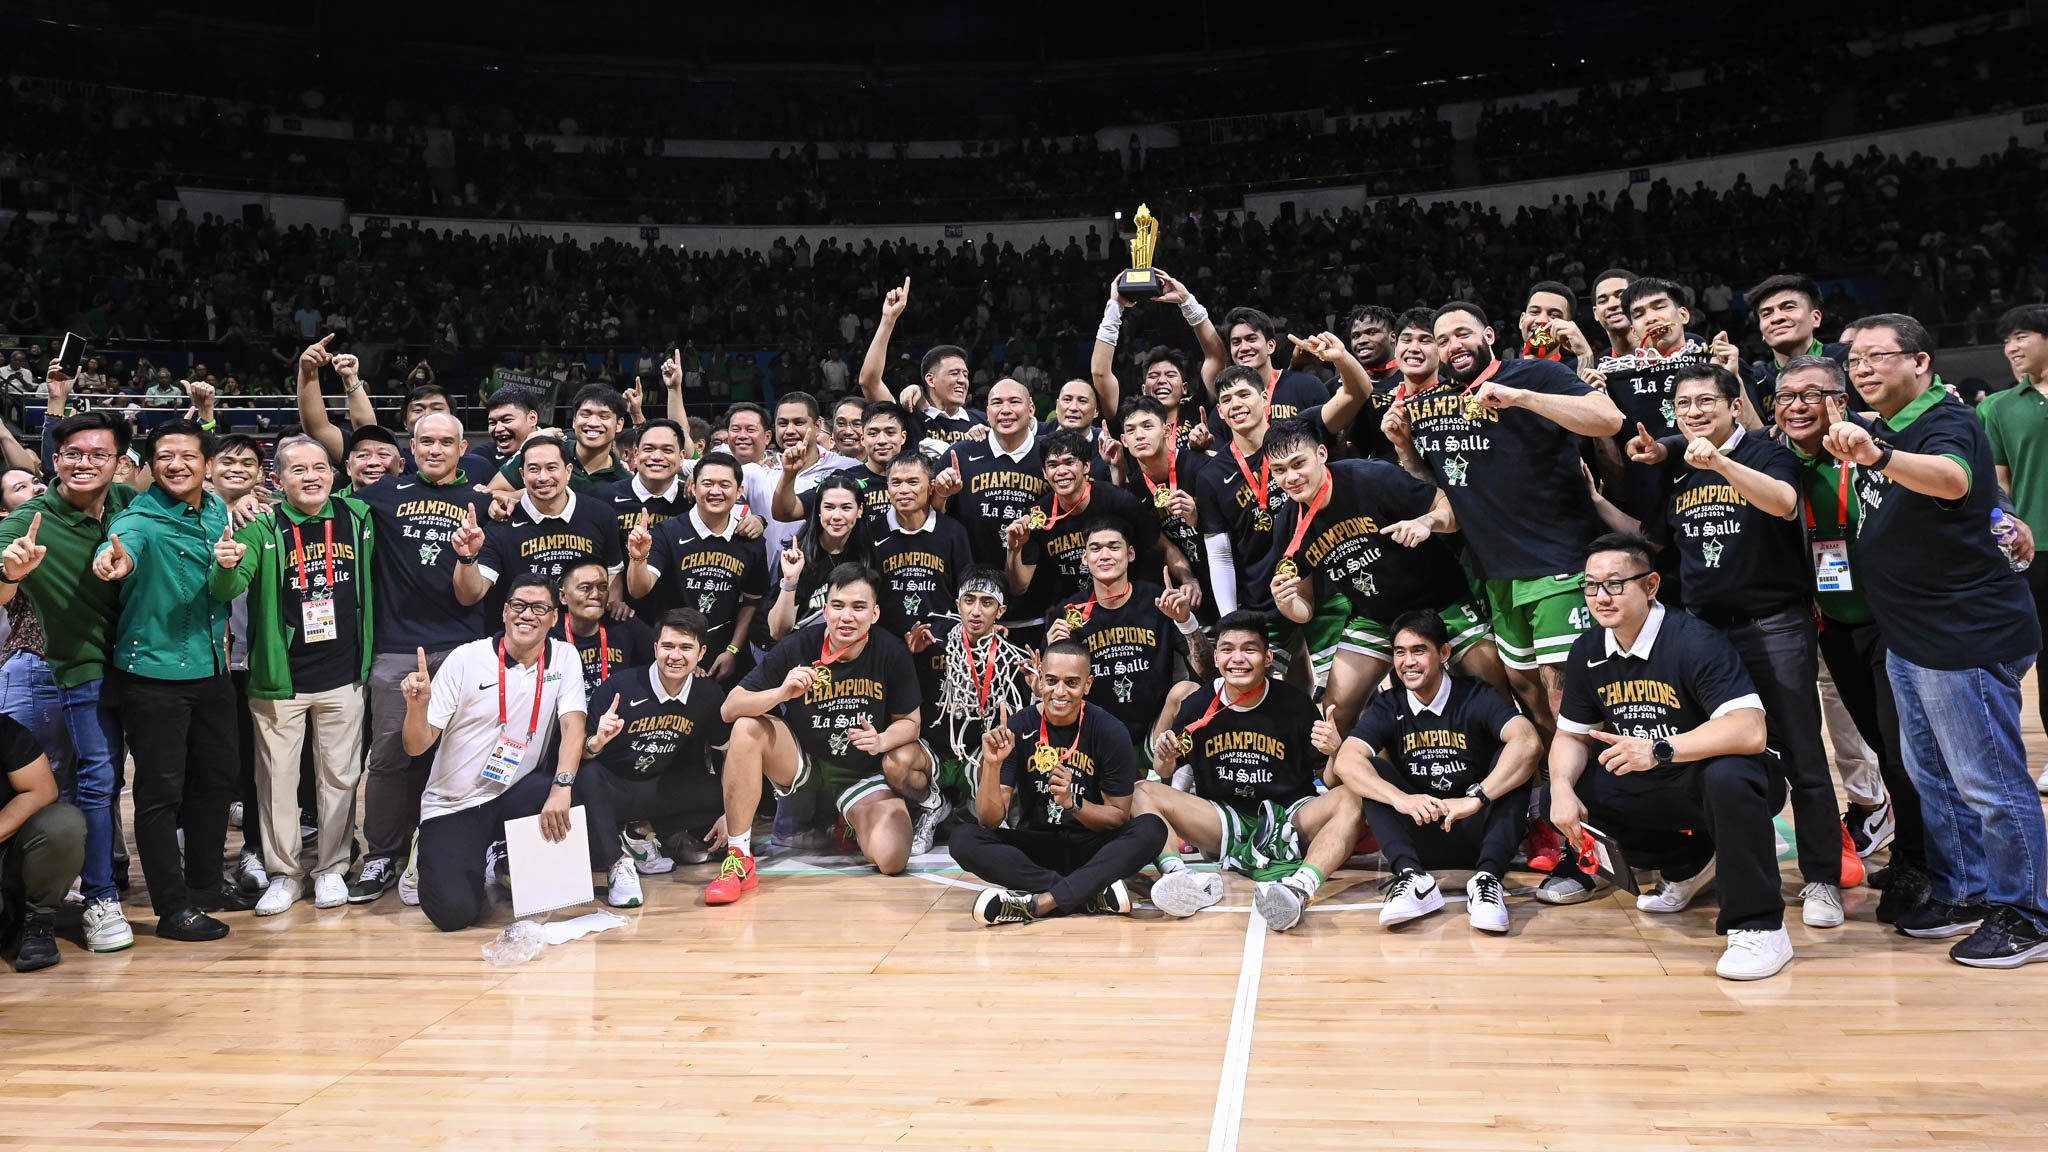 UAAP86-MBB-G3-CHAMPION-DLSU-7394 Ef Escandor hopes to have turned doubters to believers during final run with La Salle Basketball DLSU News UAAP  - philippine sports news